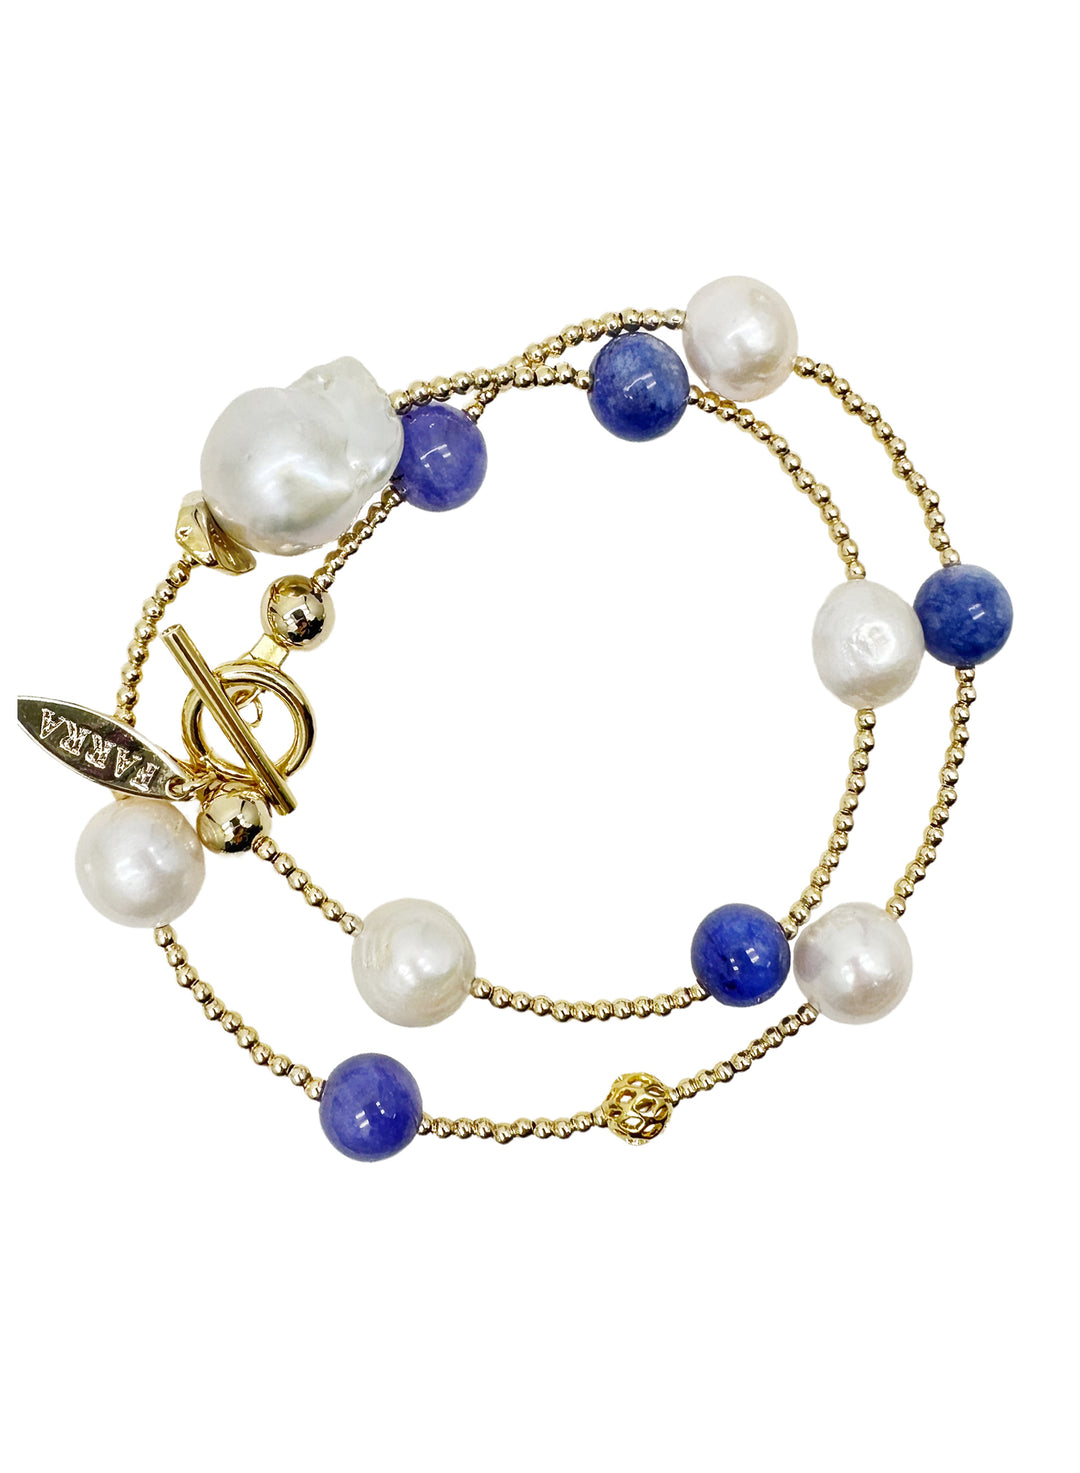 Introducing our versatile Blue Jade and Baroque Pearls Double Layer Bracelet LB010 - FARRA